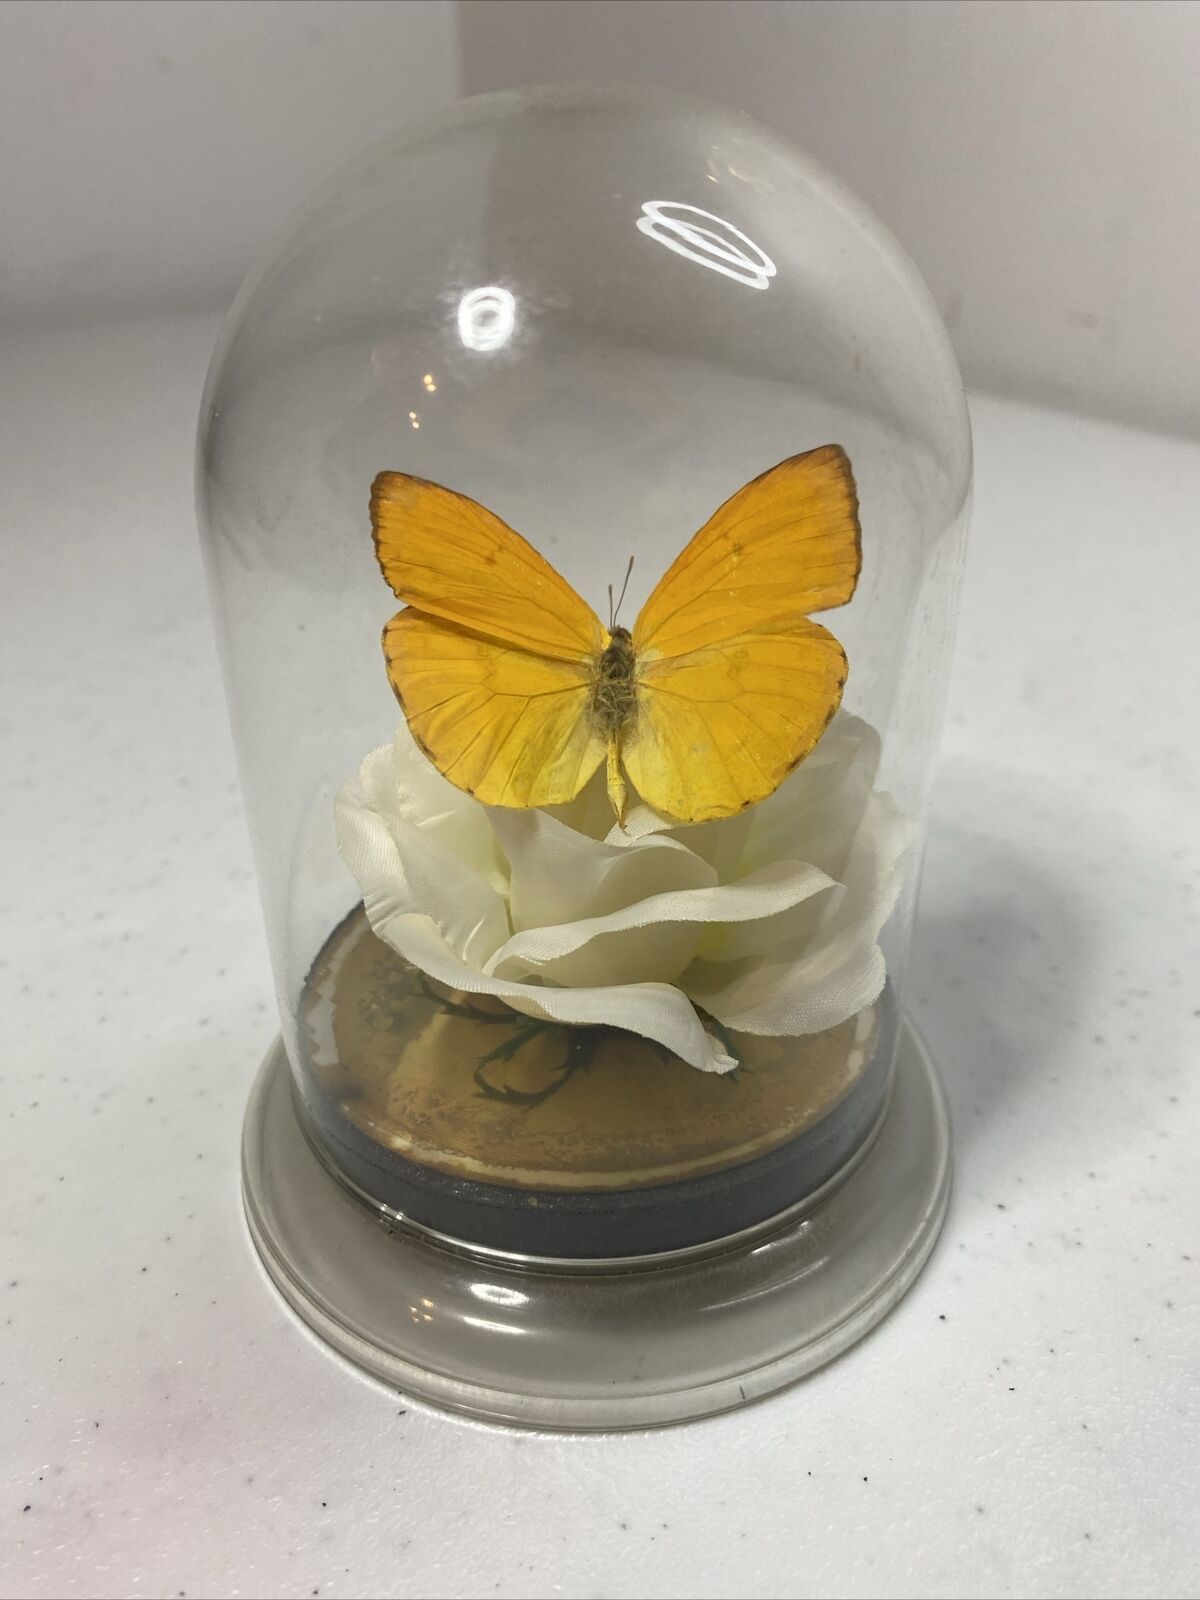 Vintage  Yellow Butterfly On White Rose Flower Framed under Glass Dome